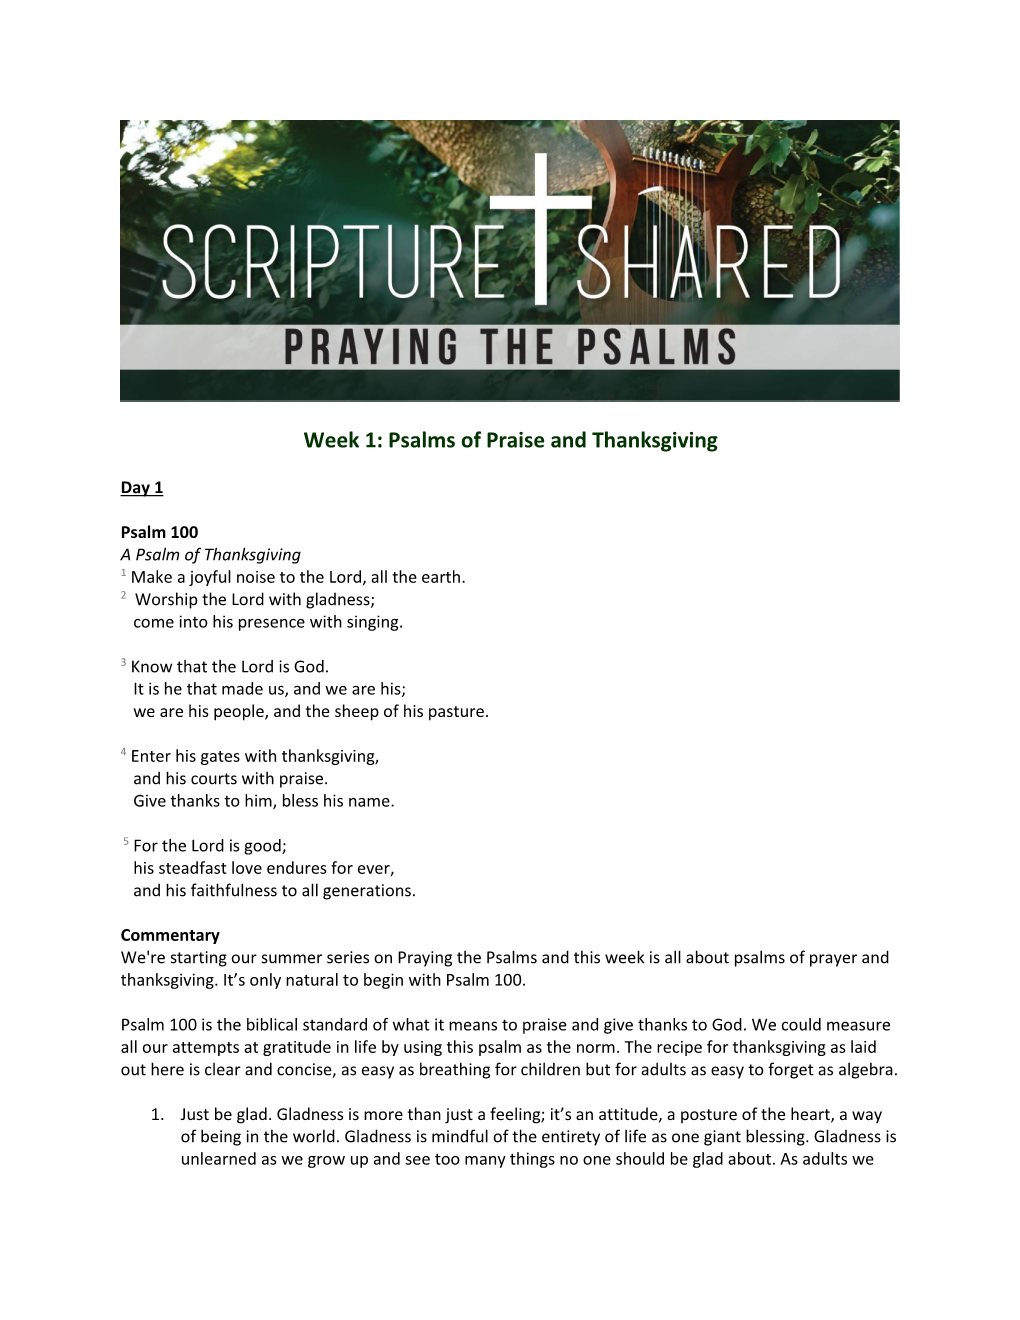 Week 1: Psalms of Praise and Thanksgiving